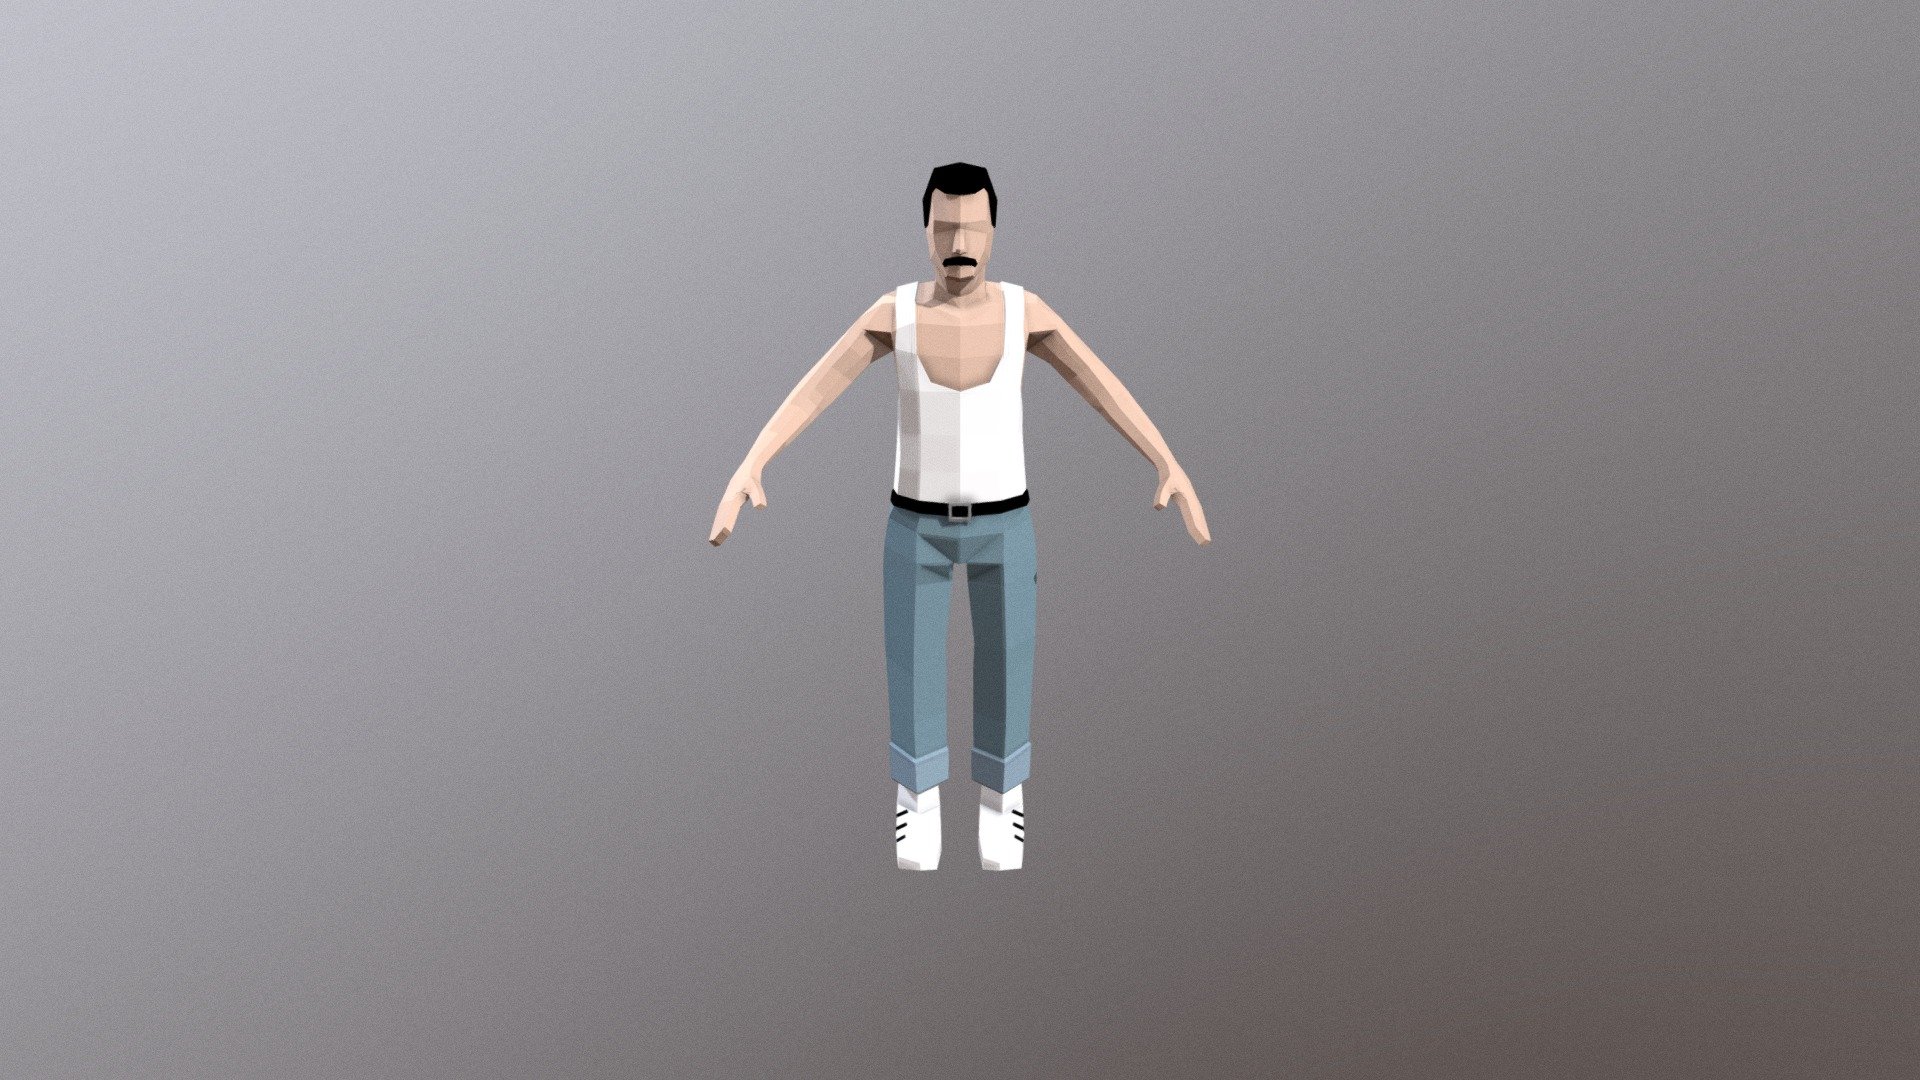 Freddie Mercury in a T-shirt for Ravenfield.
Mod in Steam:
https://steamcommunity.com/sharedfiles/filedetails/?id=1795149639 - Freddie Mercury in a T-shirt - 3D model by Sirius (@EagleTeam) 3d model